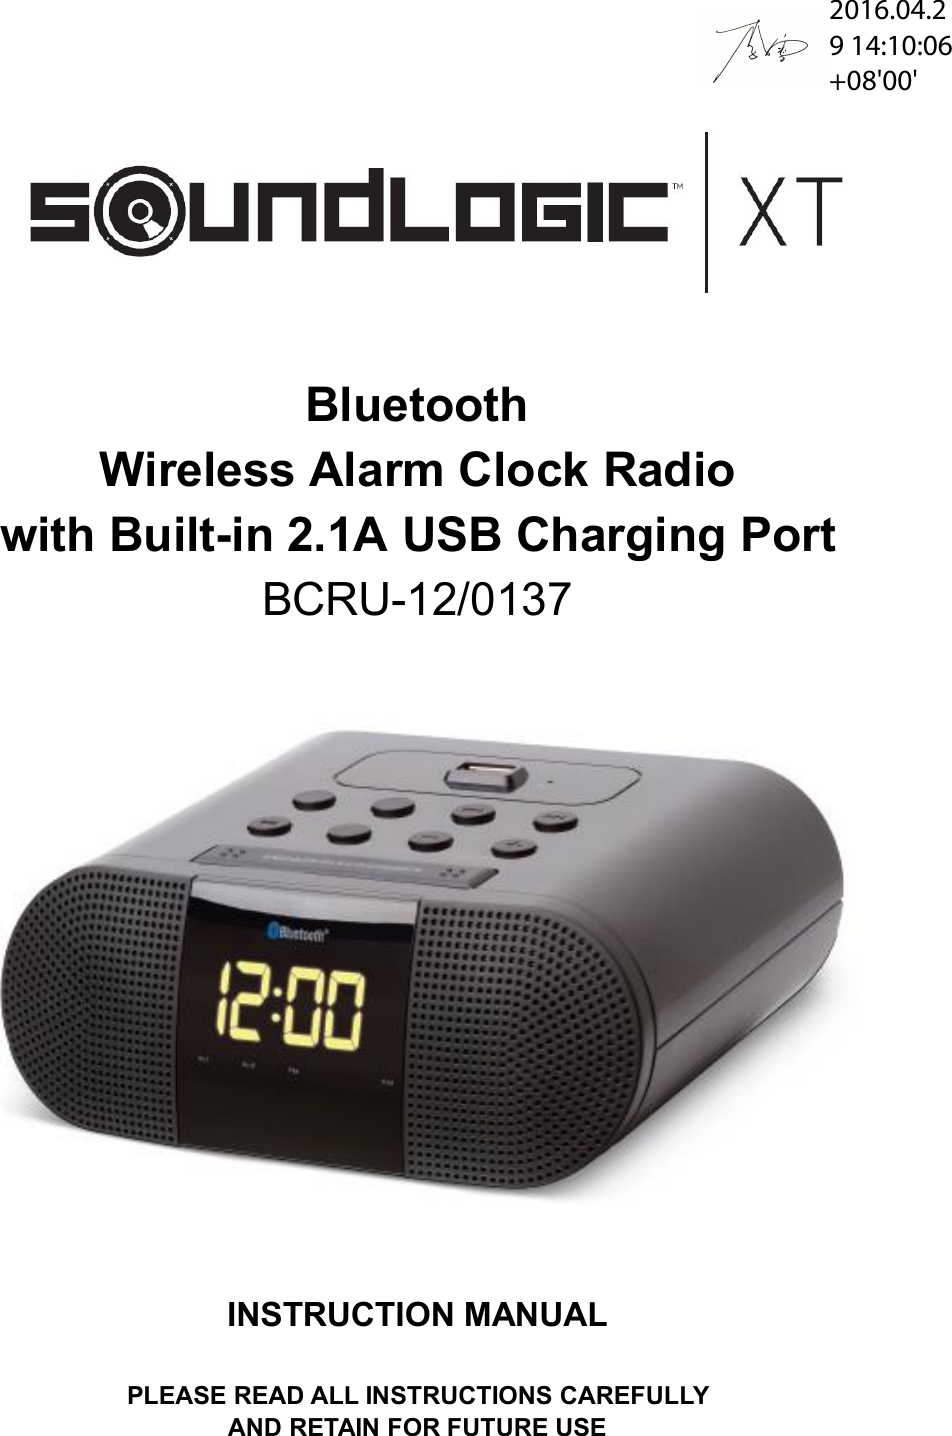 BluetoothWireless Alarm Clock Radiowith Built-in 2.1A USB Charging PortBCRU-12/0137INSTRUCTION MANUALPLEASE READ ALL INSTRUCTIONS CAREFULLYAND RETAIN FOR FUTURE USE2016.04.29 14:10:06 +08&apos;00&apos;